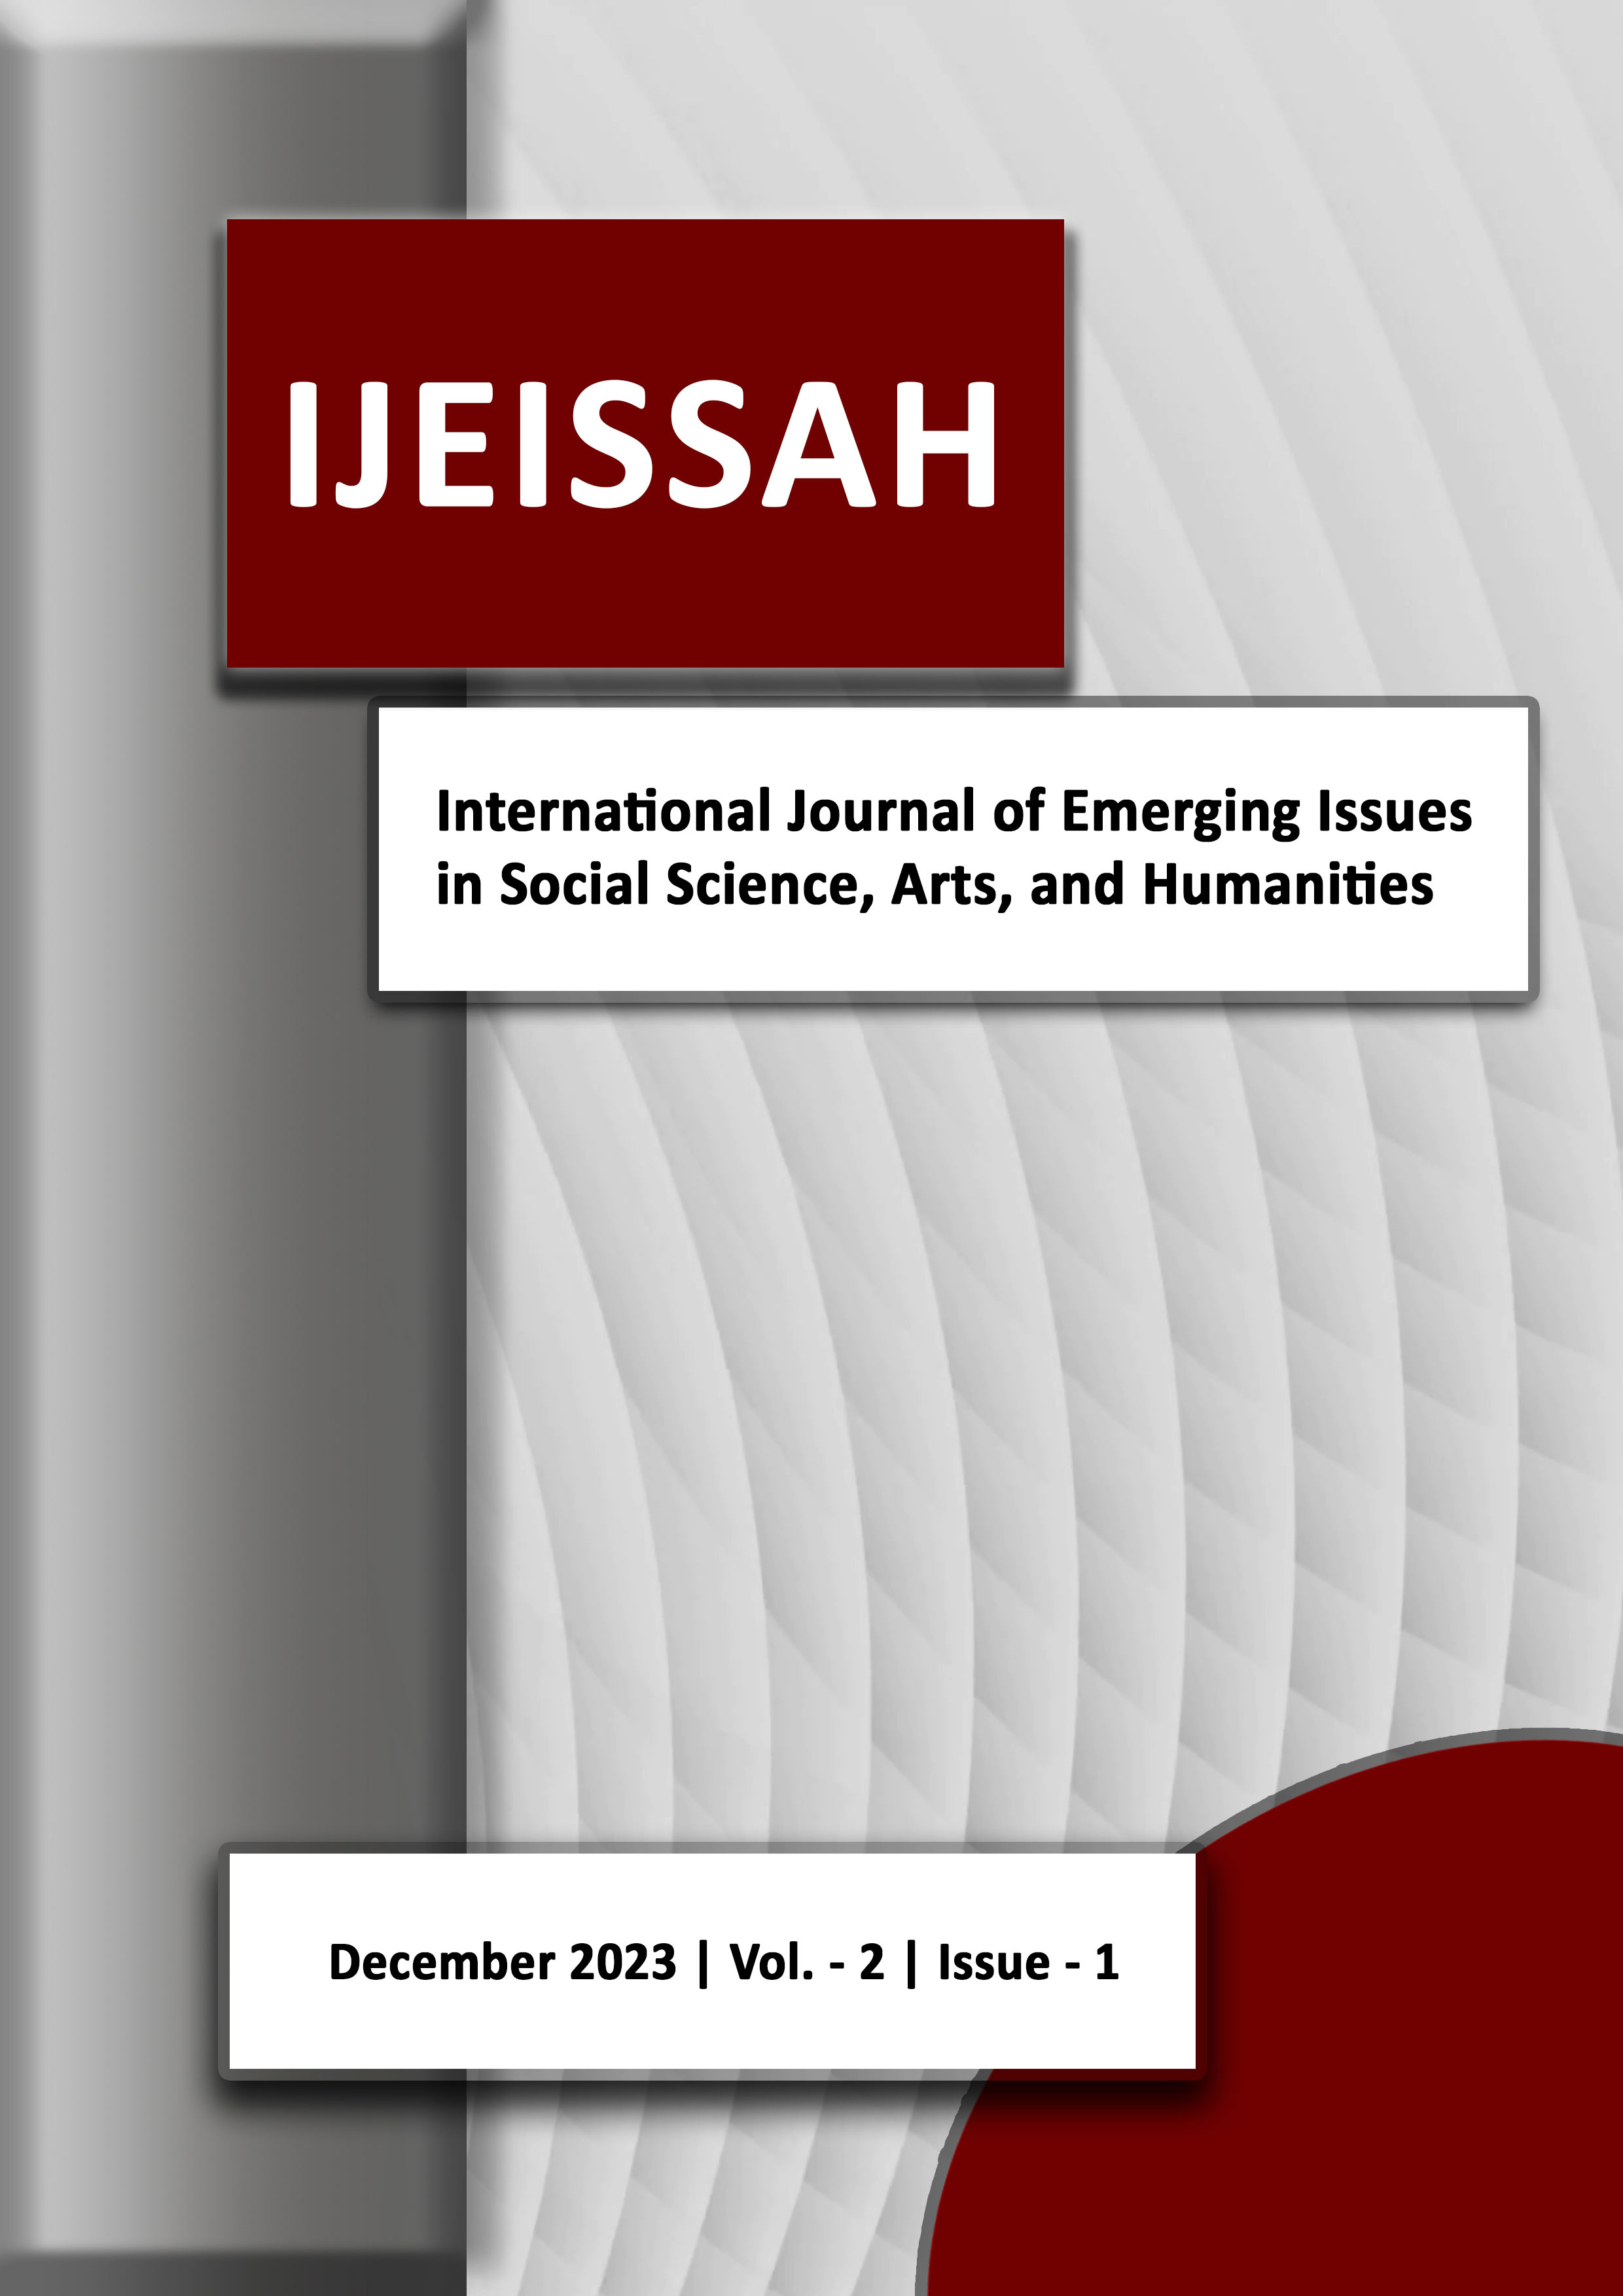 					View Vol. 2 No. 1 (2023): International Journal of Emerging Issues in Social Science, Arts, and Humanities (IJEISSAH)
				